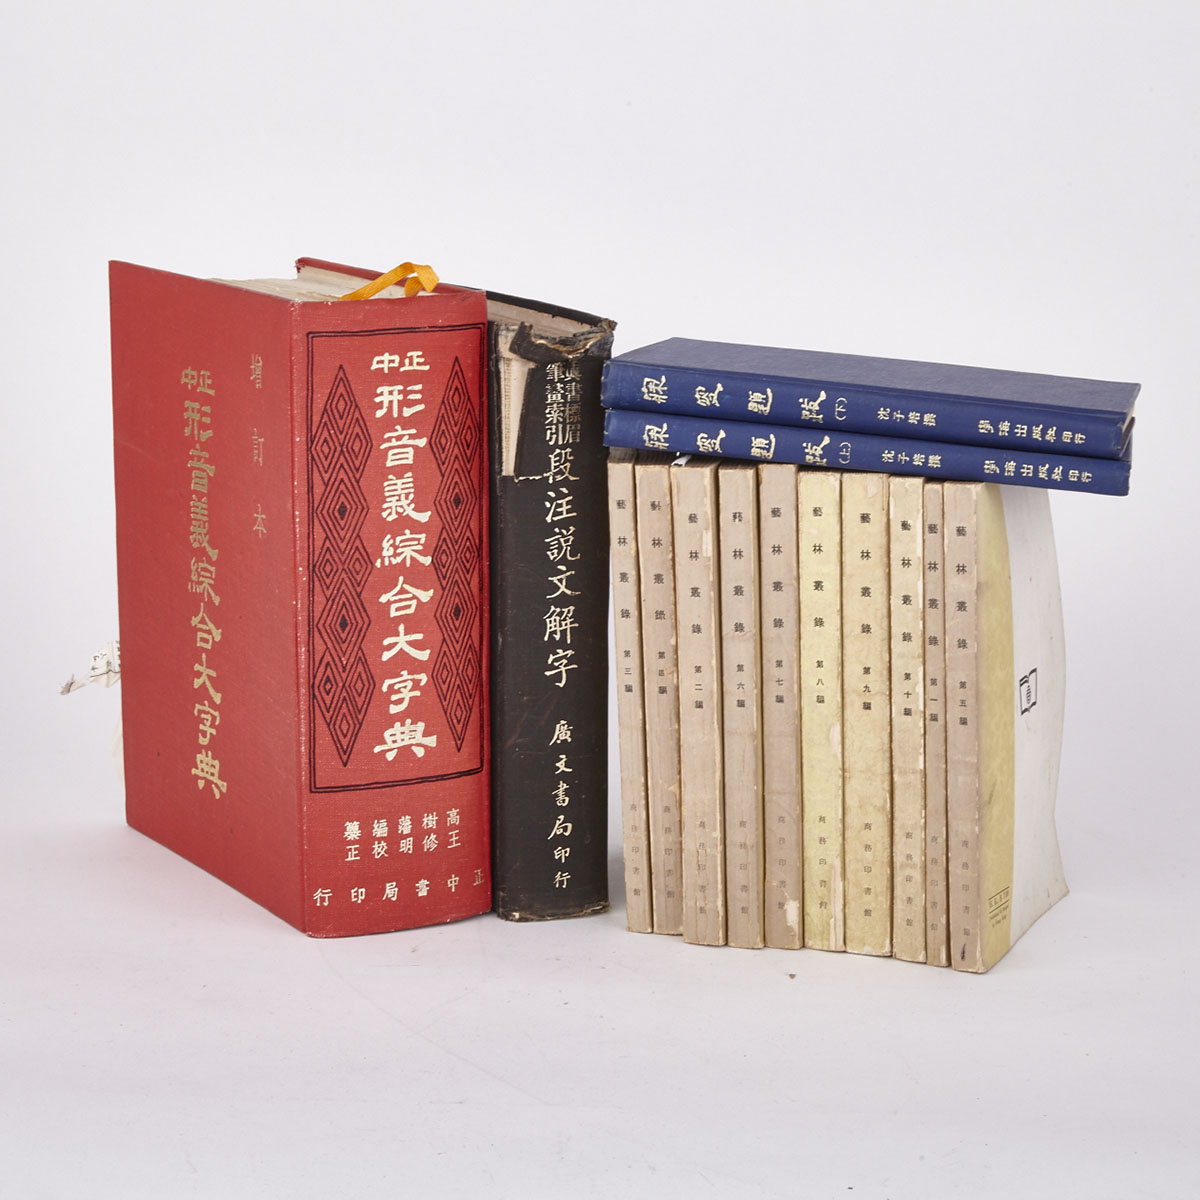 14 Volumes on Chinese Character Dictionary